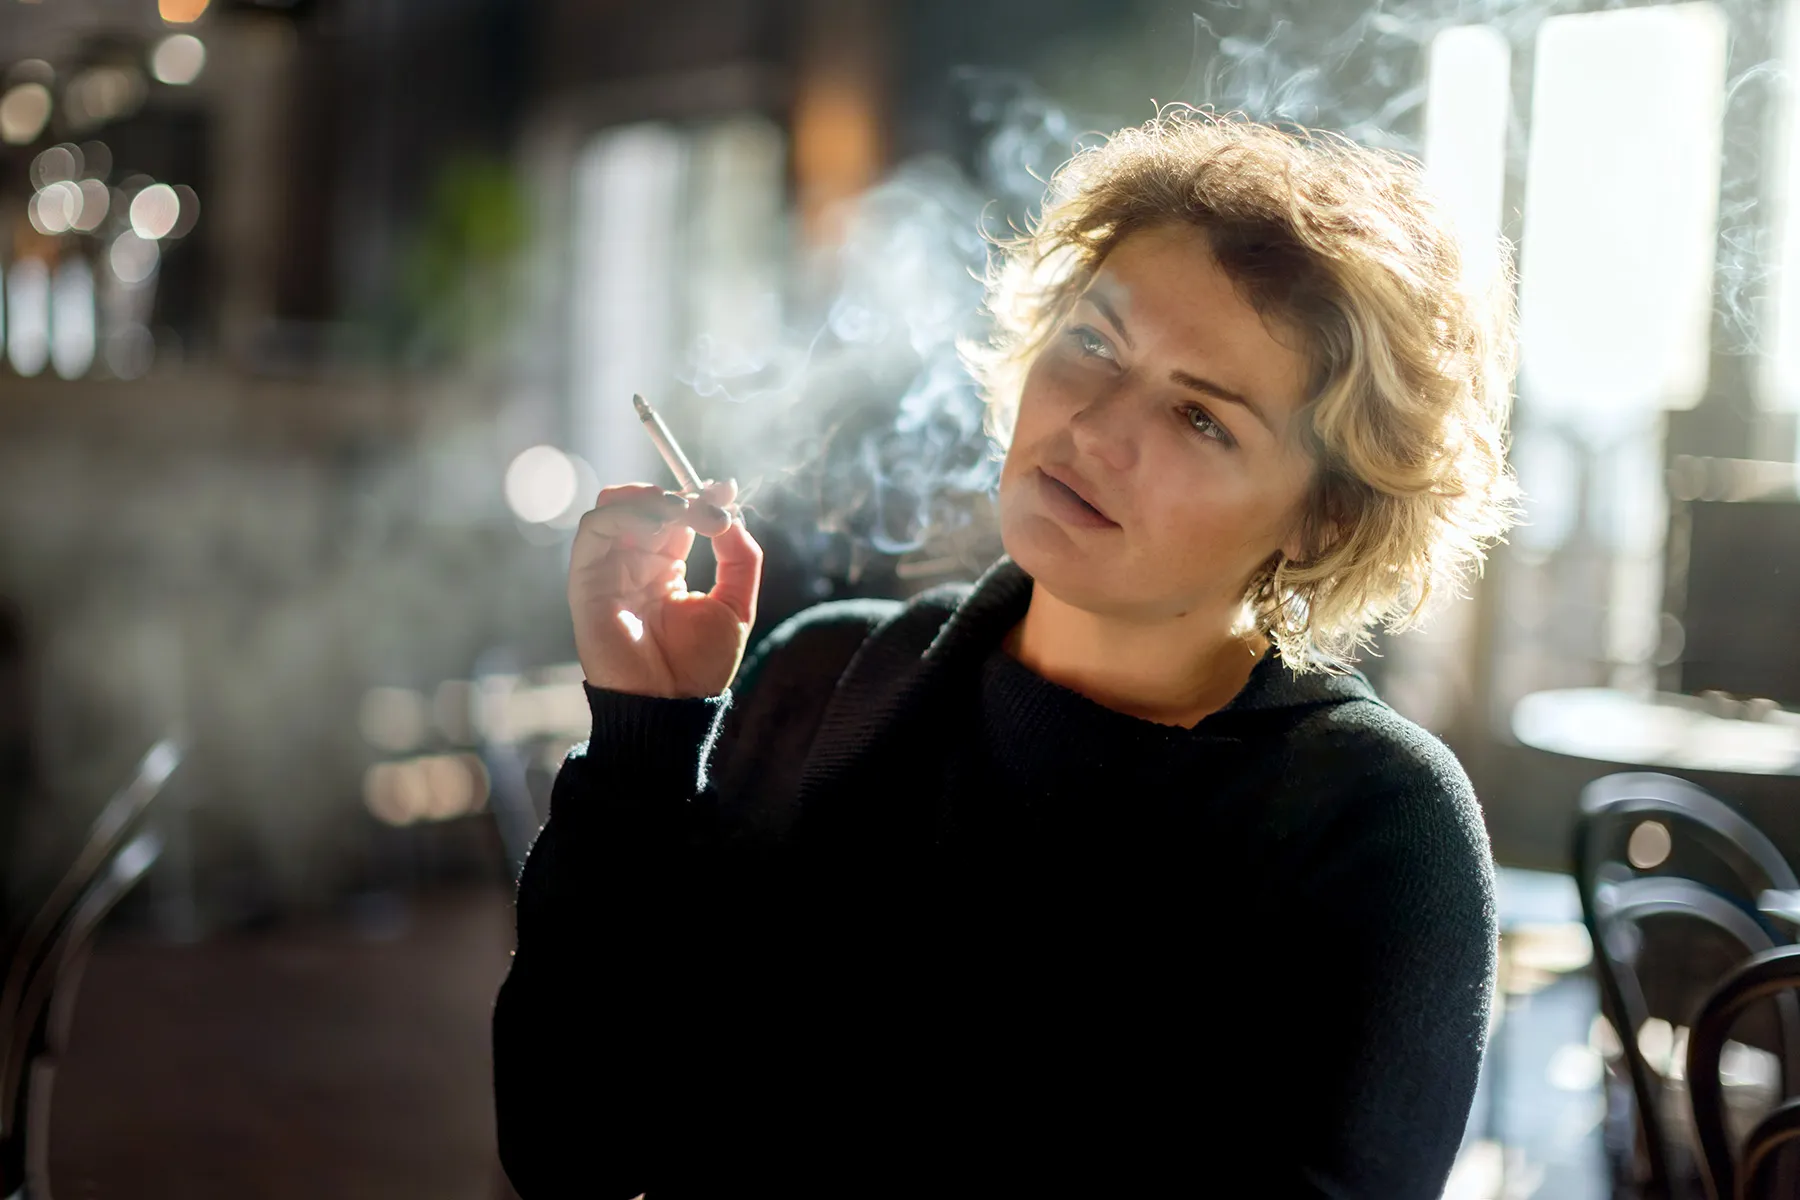 photo of woman smoking in restaurant